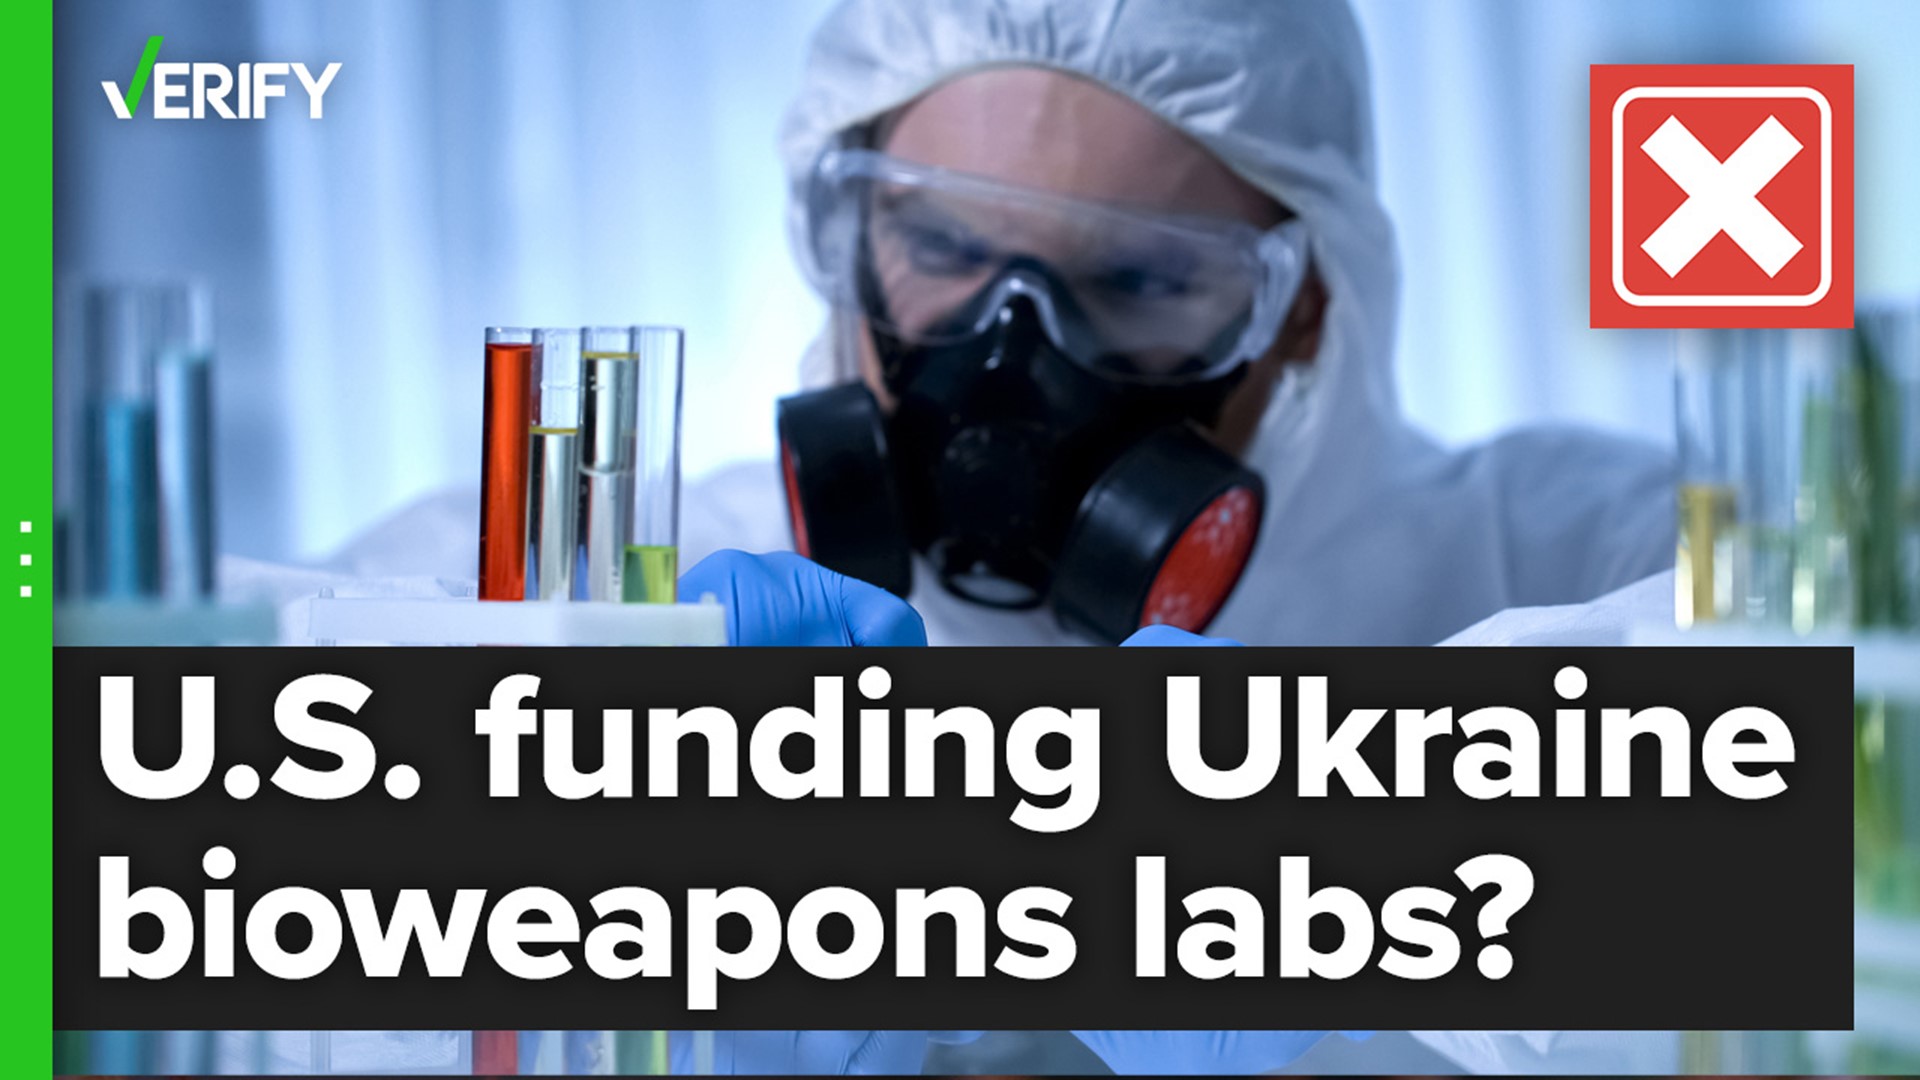 A treaty bars the U.S. from funding biological weapons labs anywhere and there’s no evidence these kinds of labs exist at all in Ukraine.